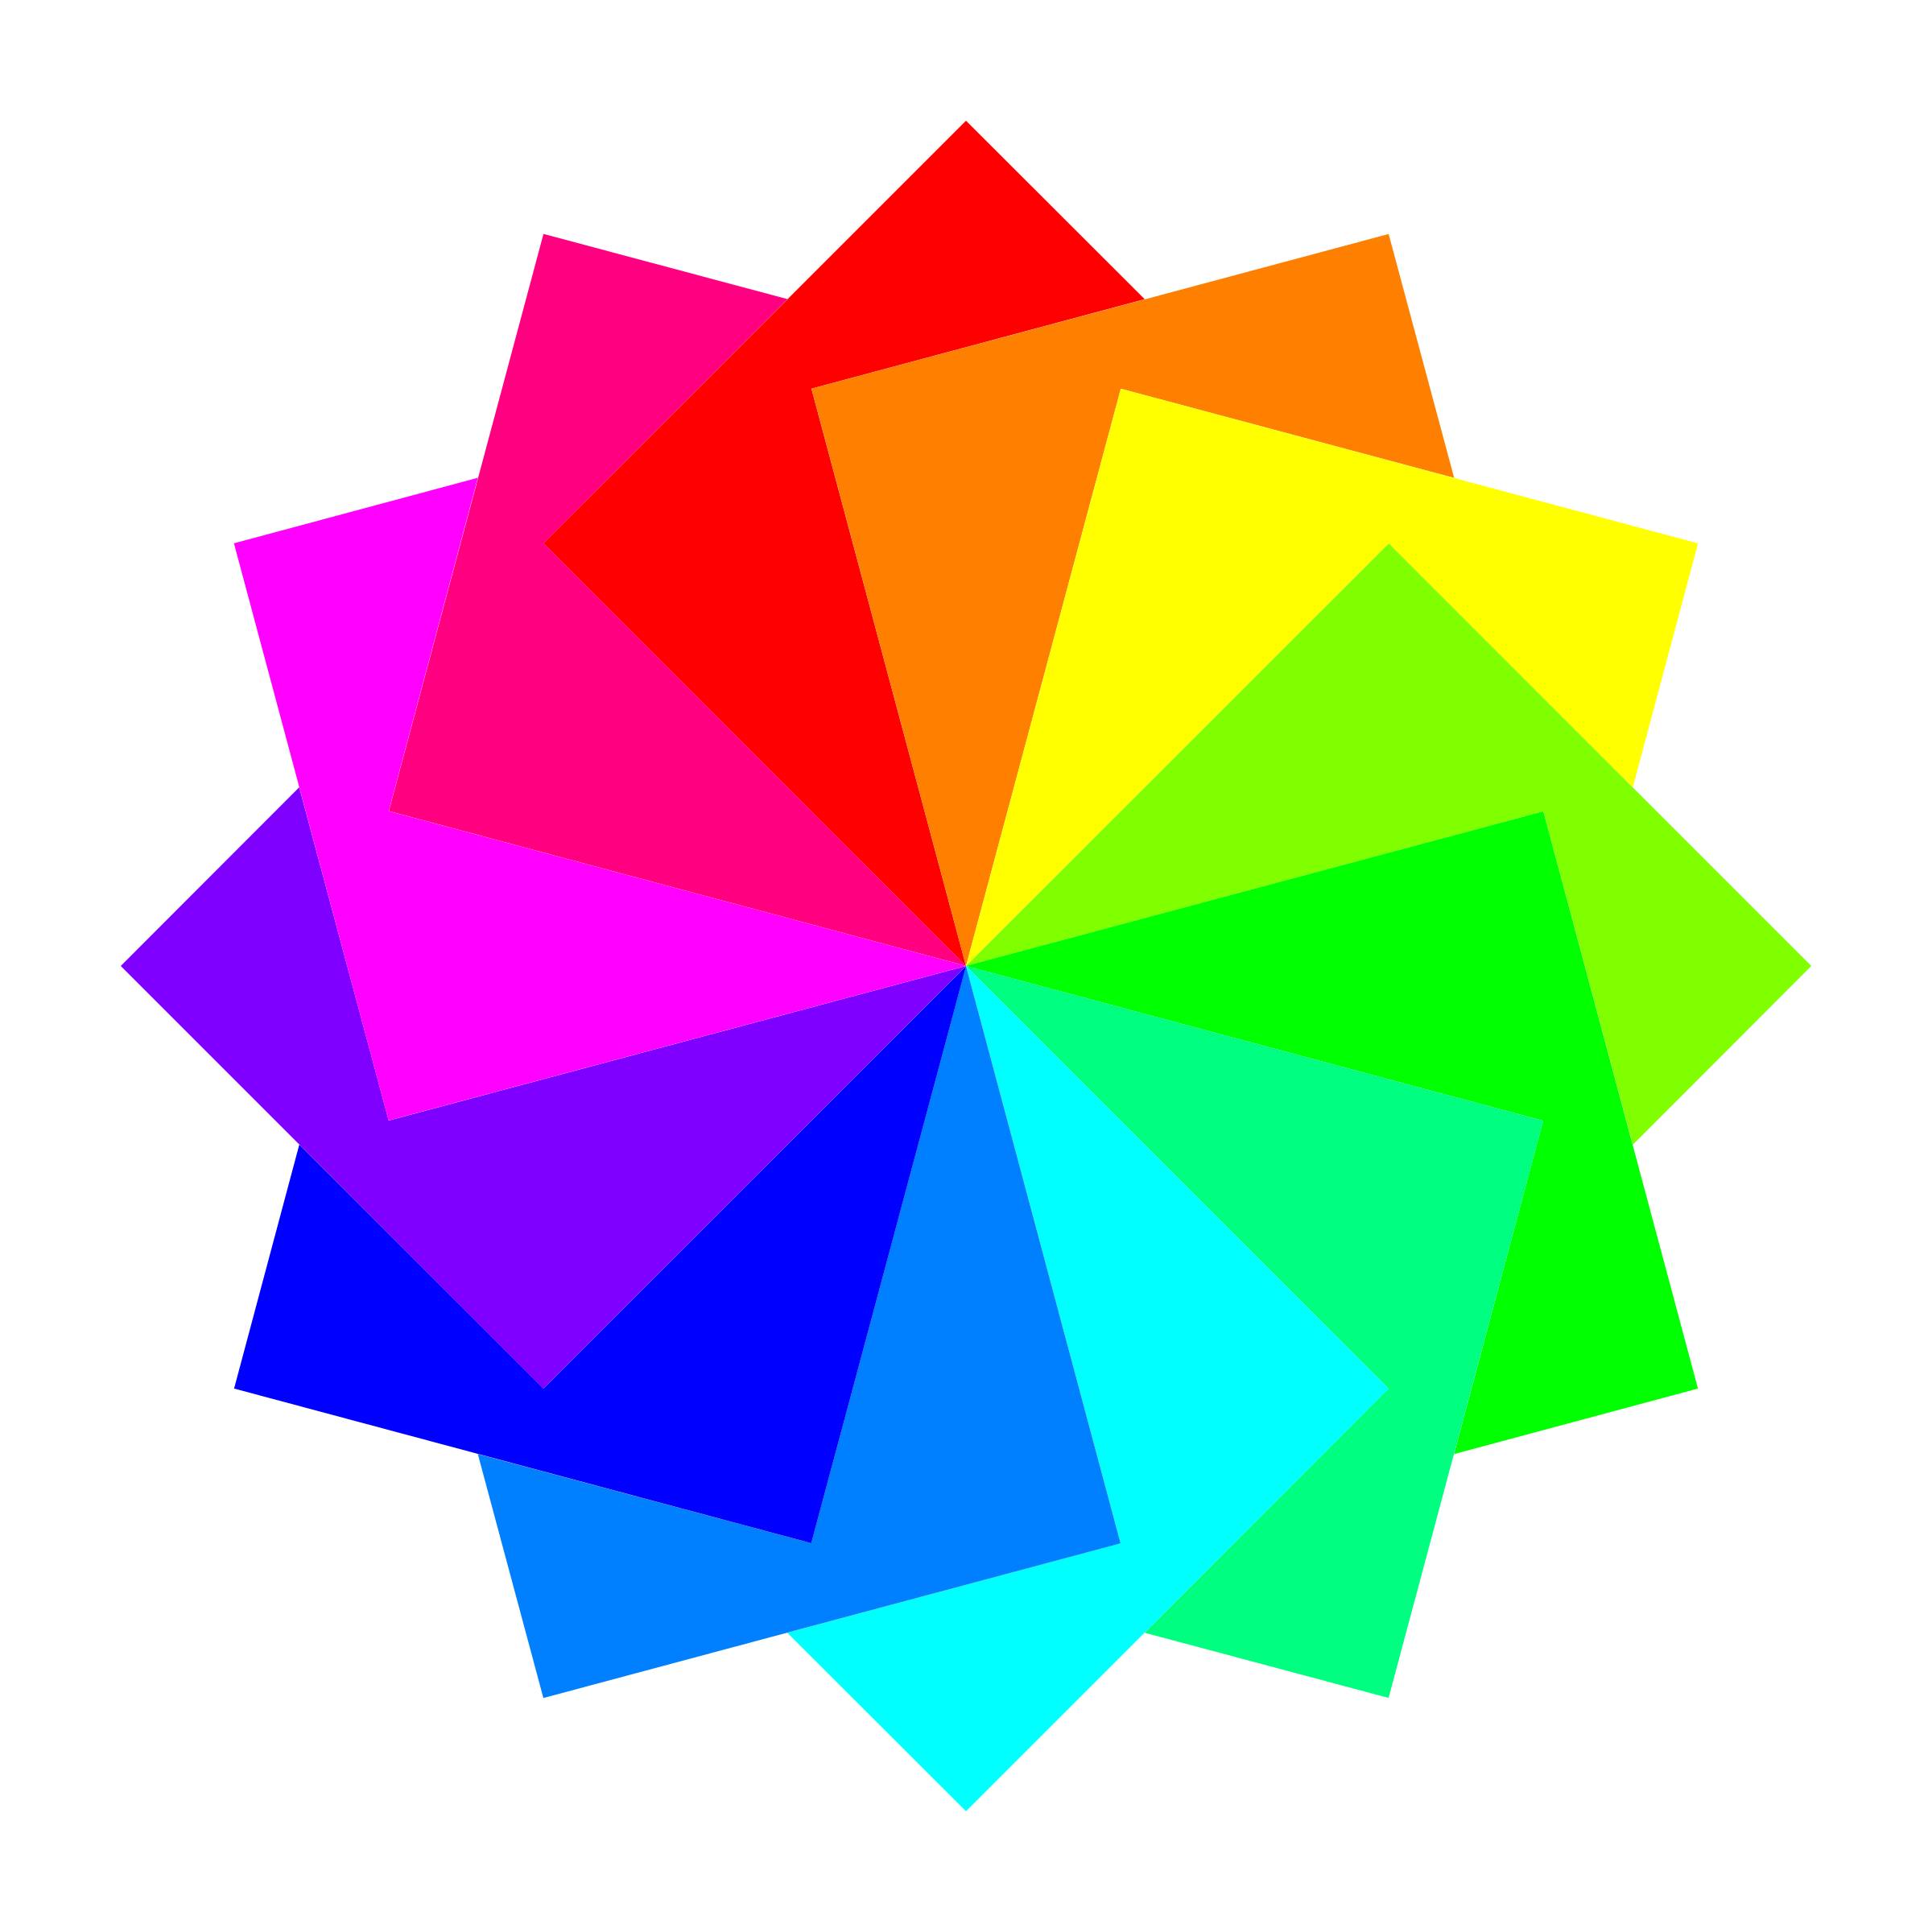 12 Square Dodecagram By 10binary